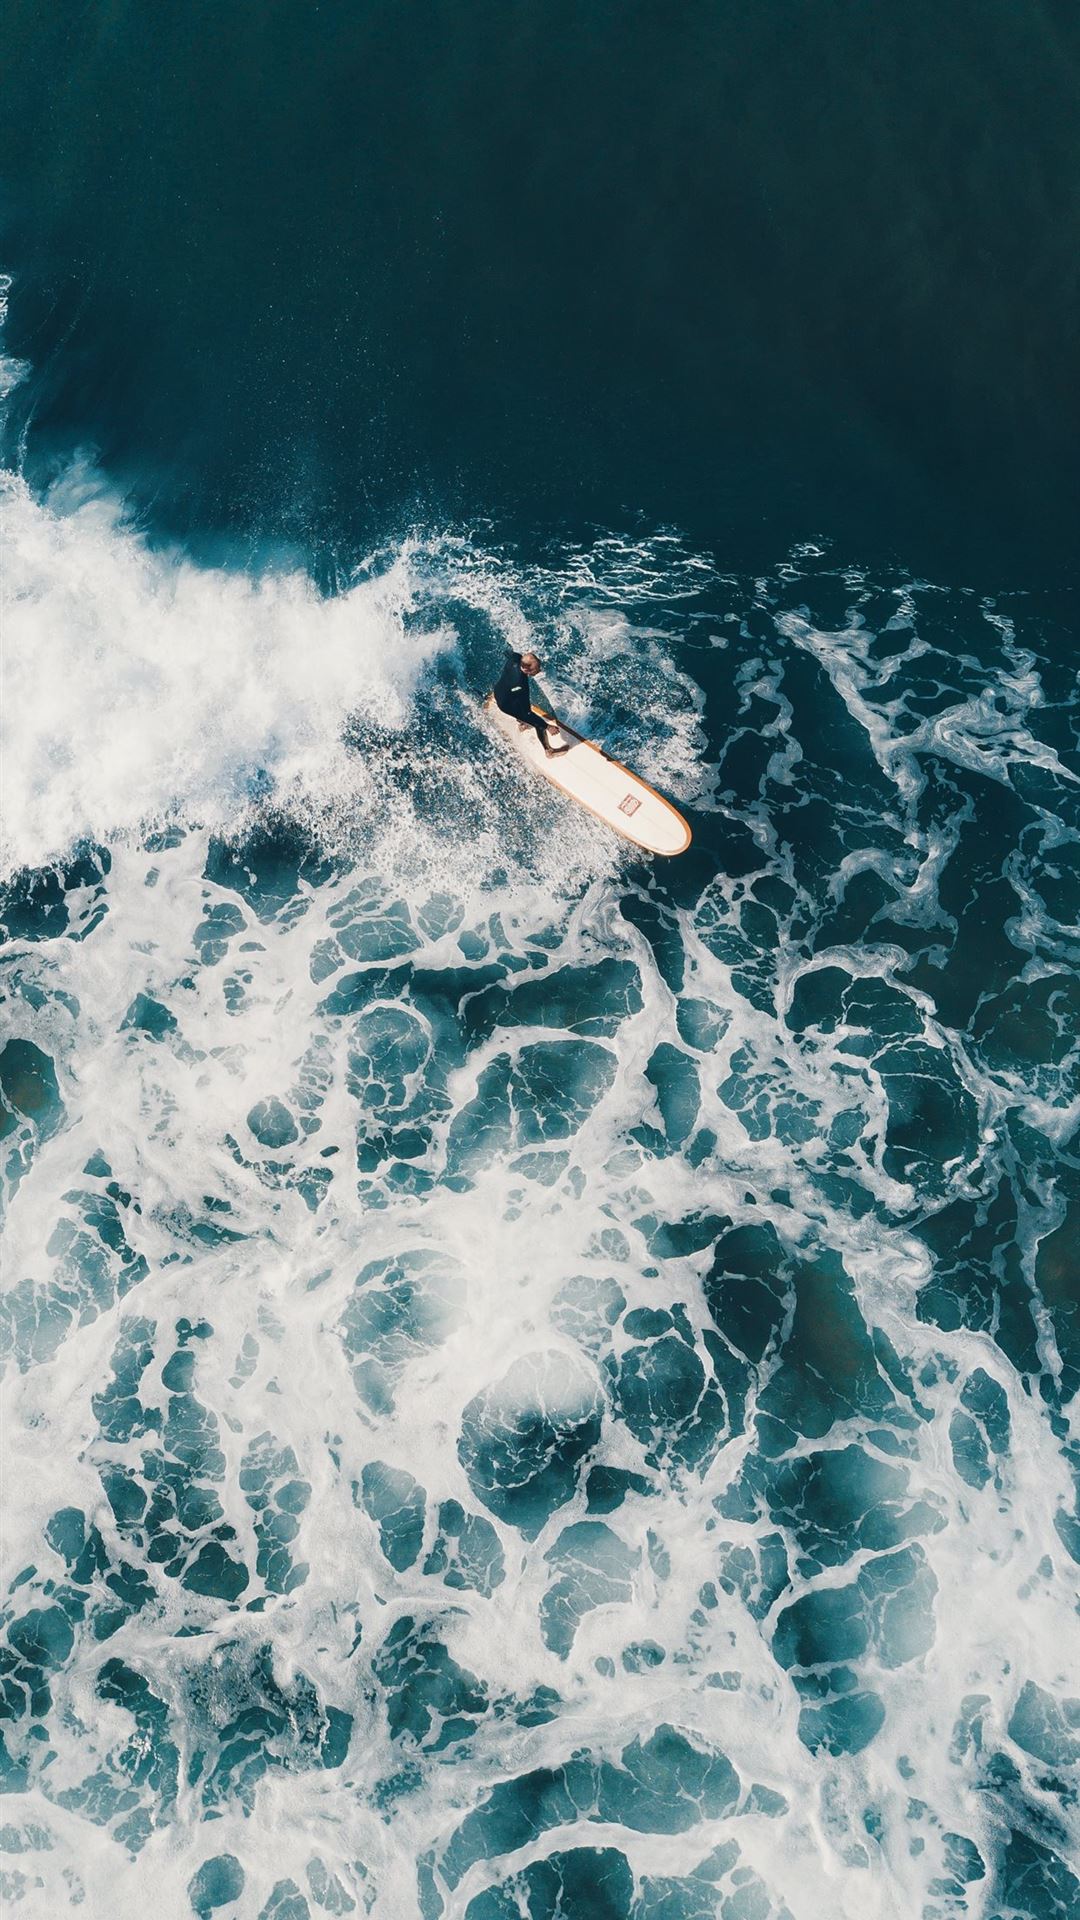 Aerial view of a surfer riding a wave - Surf, wave